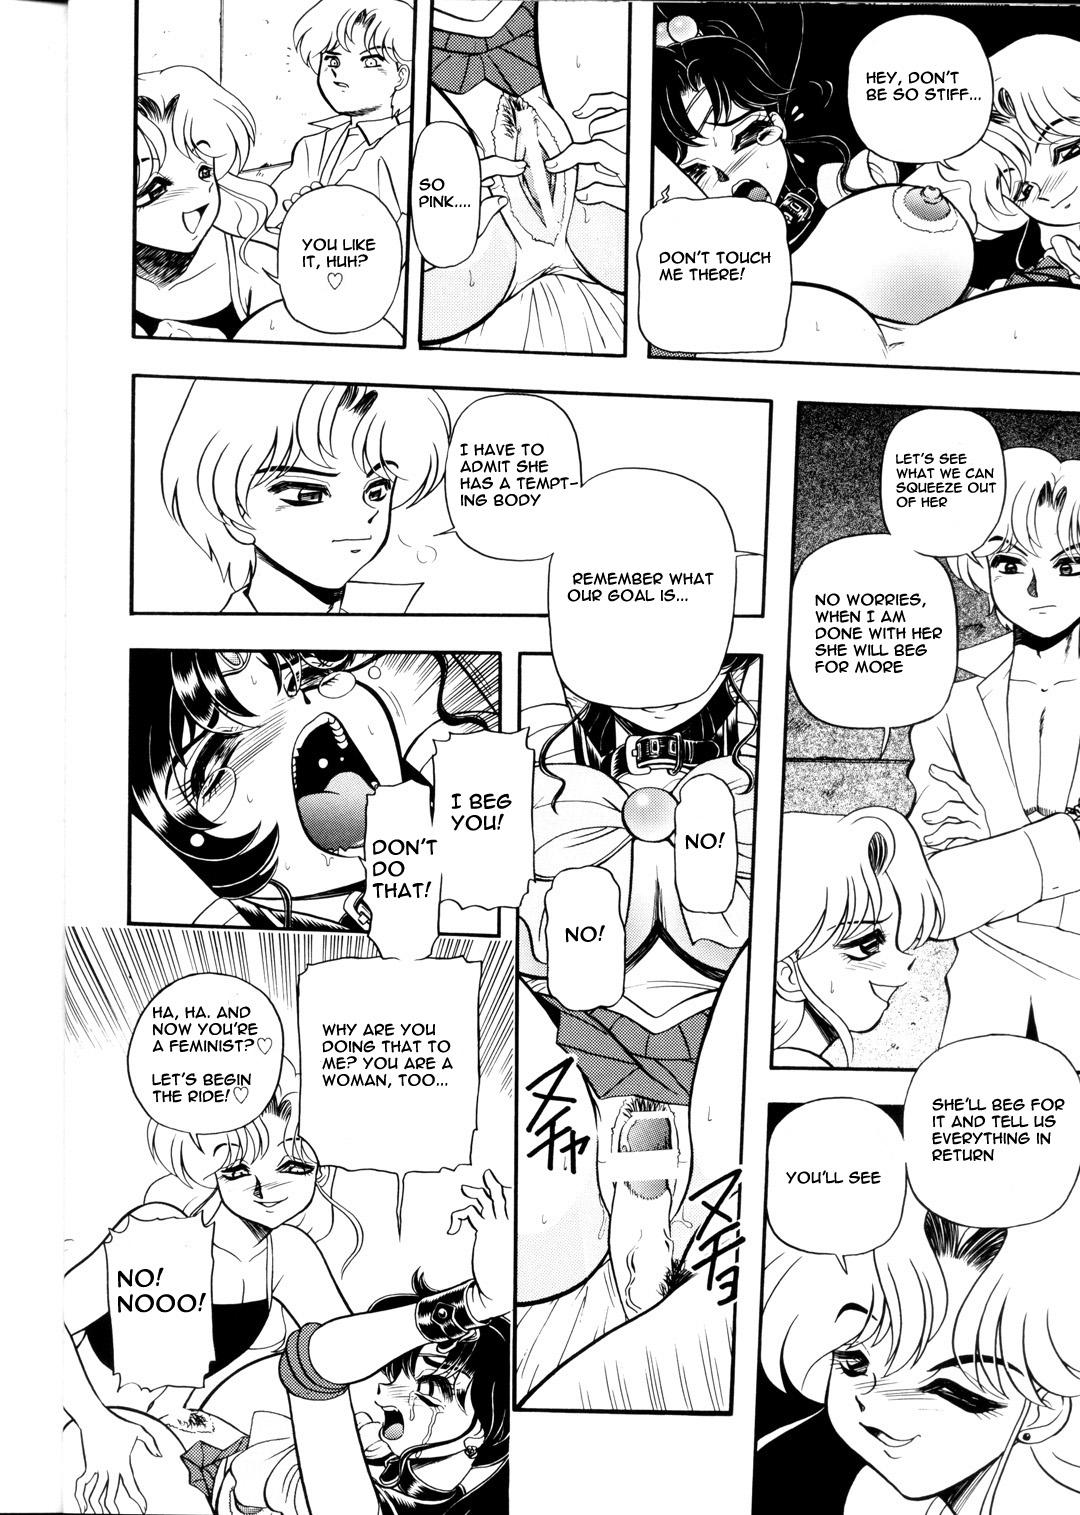 Hungarian S·M↔R - Sailor moon Sex - Page 12